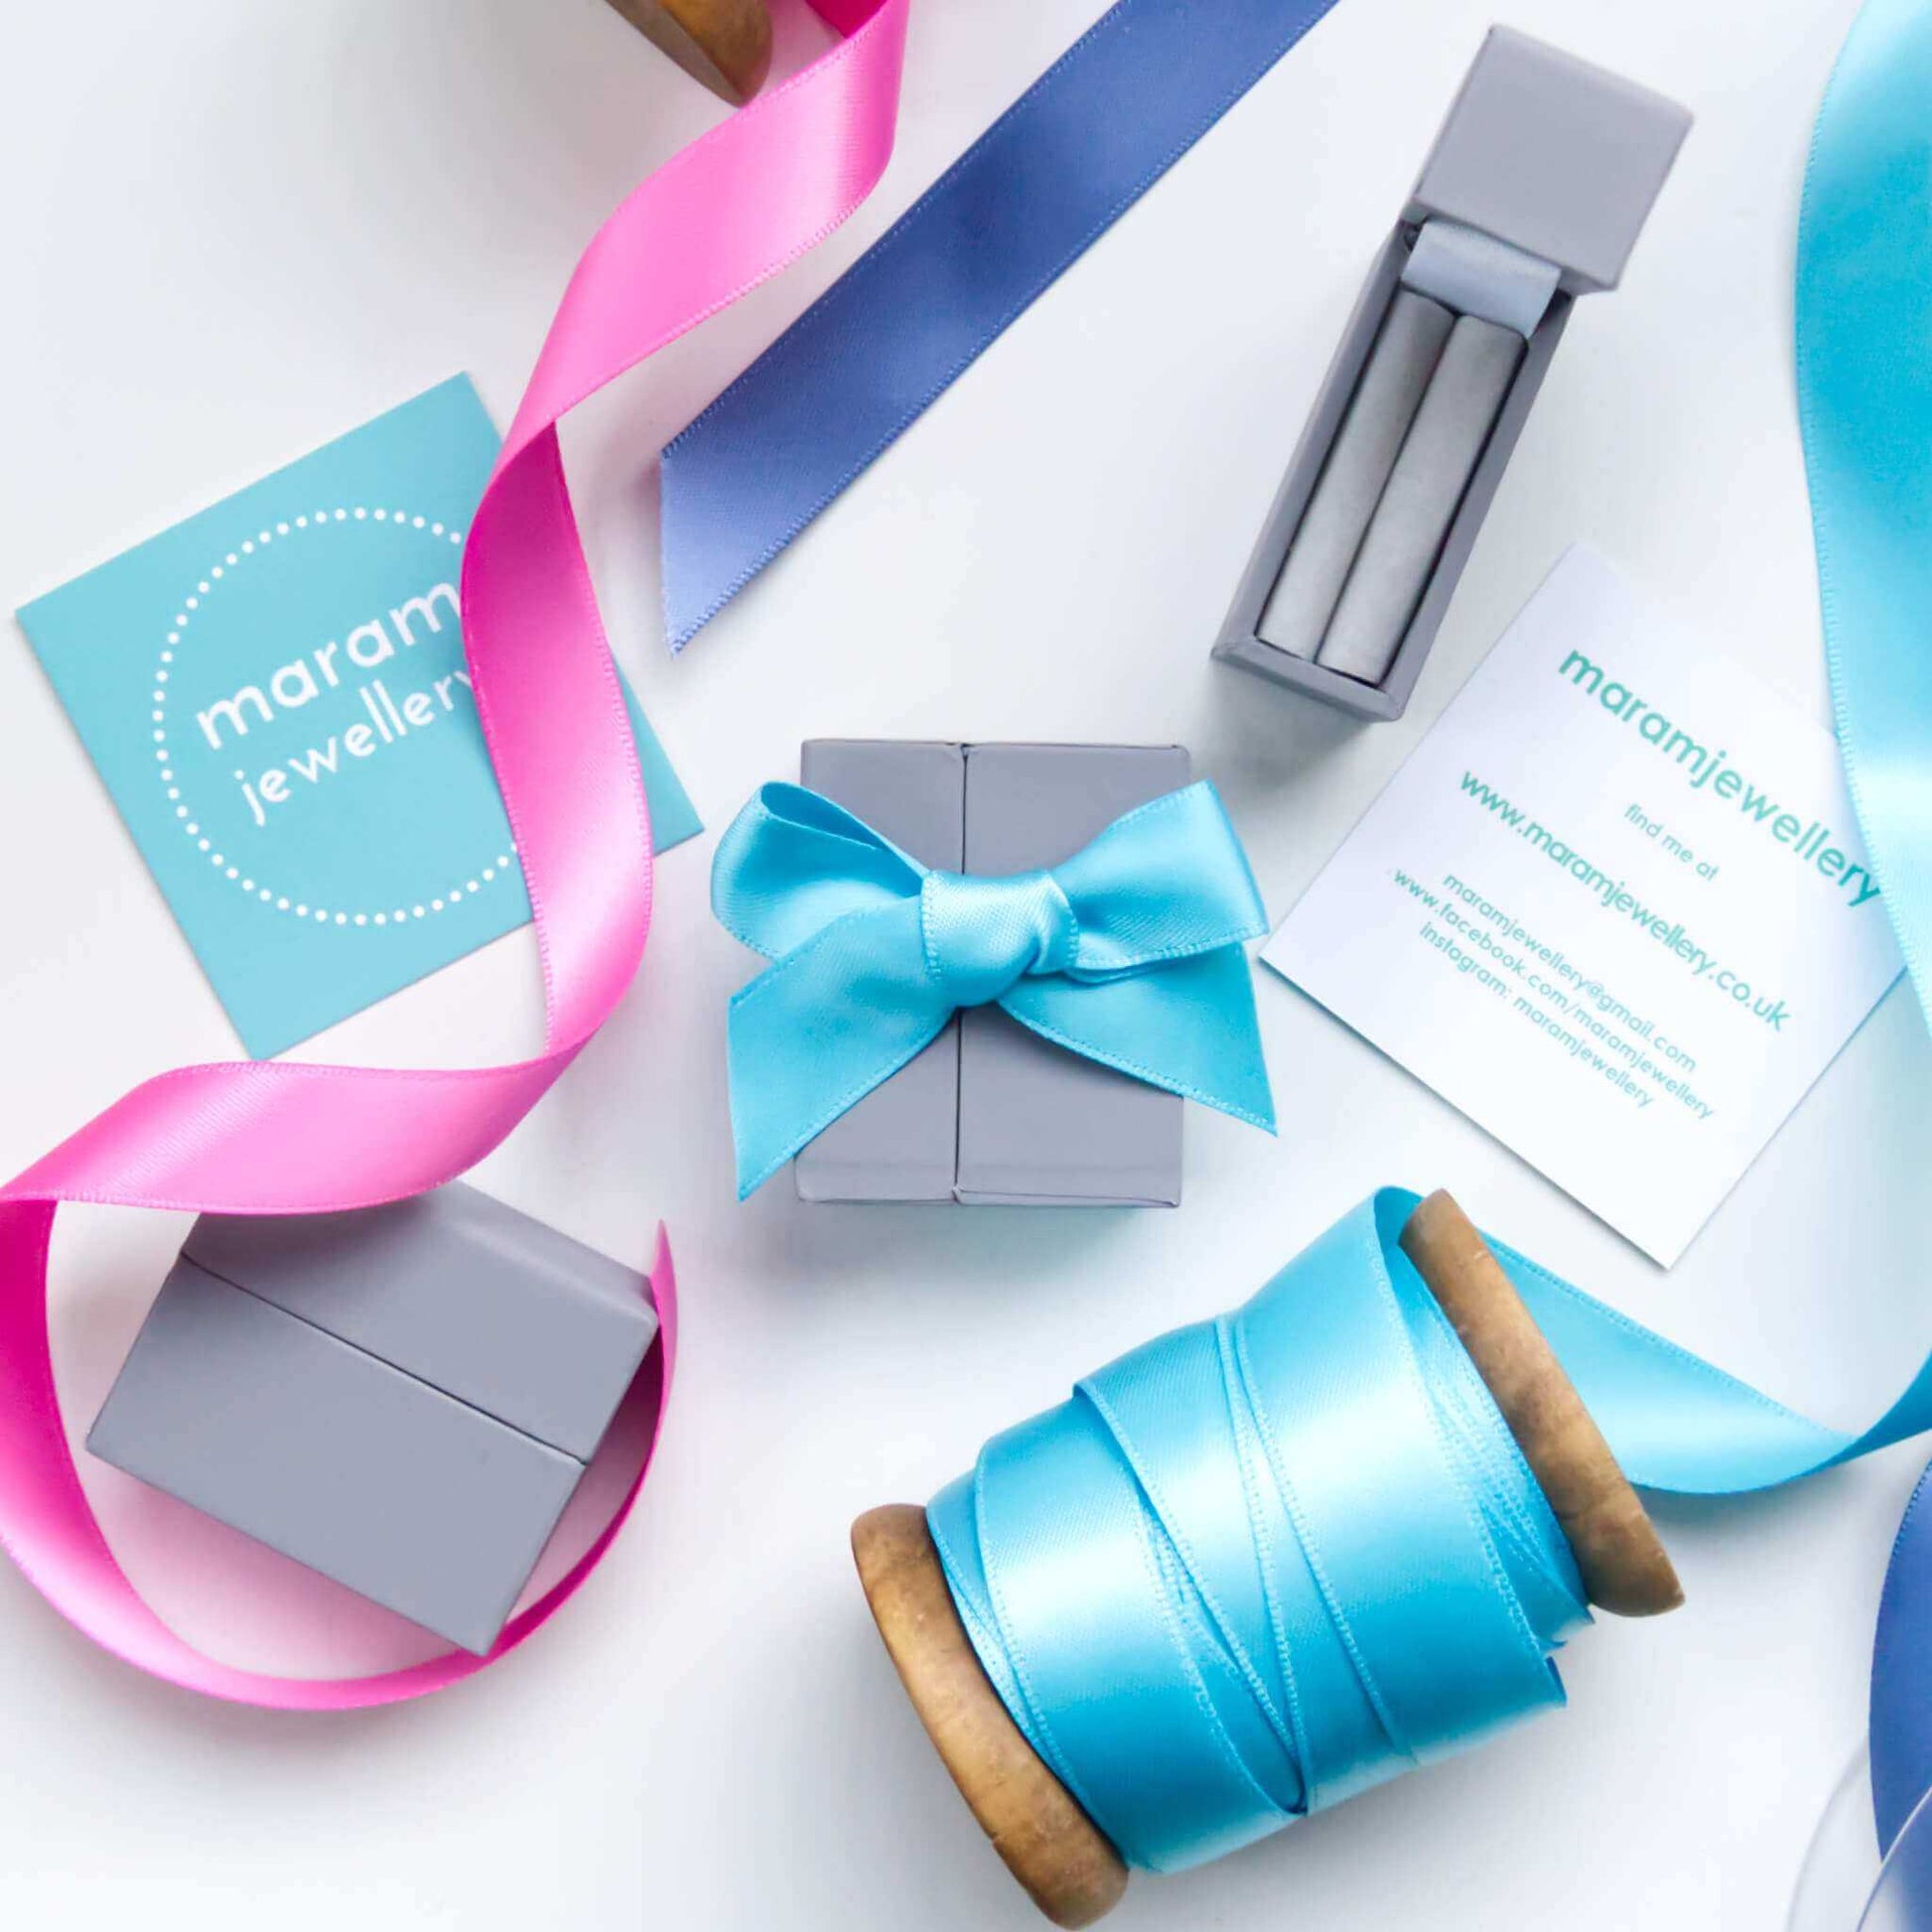 maram jewellery's ring packaging - a light grey box wrapped in colourful ribbon. Image shows box open and closed with a ribbon tie  with a selection of pink turquoise and blue ribbons in the background. maram jewellery is a small boutique jeweller in Scotland UK